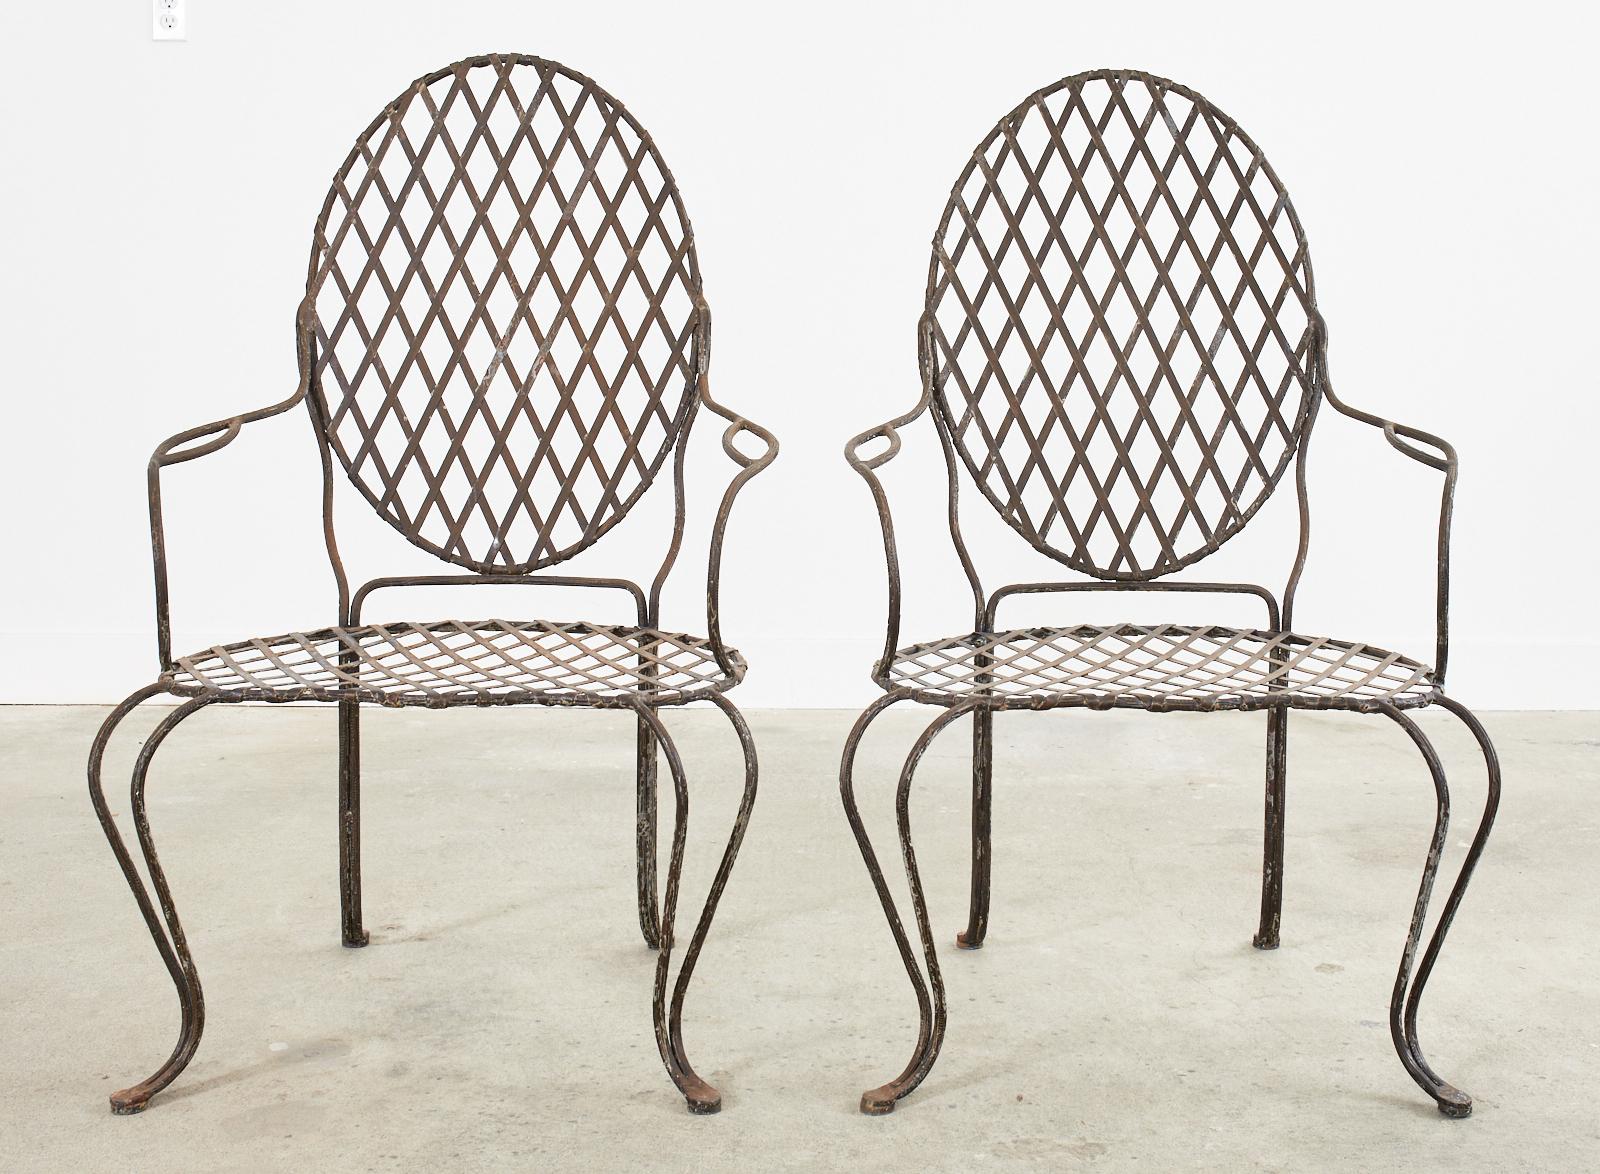 Hand-Crafted Set of Four Rose Tarlow Twig Iron Garden Dining Armchairs